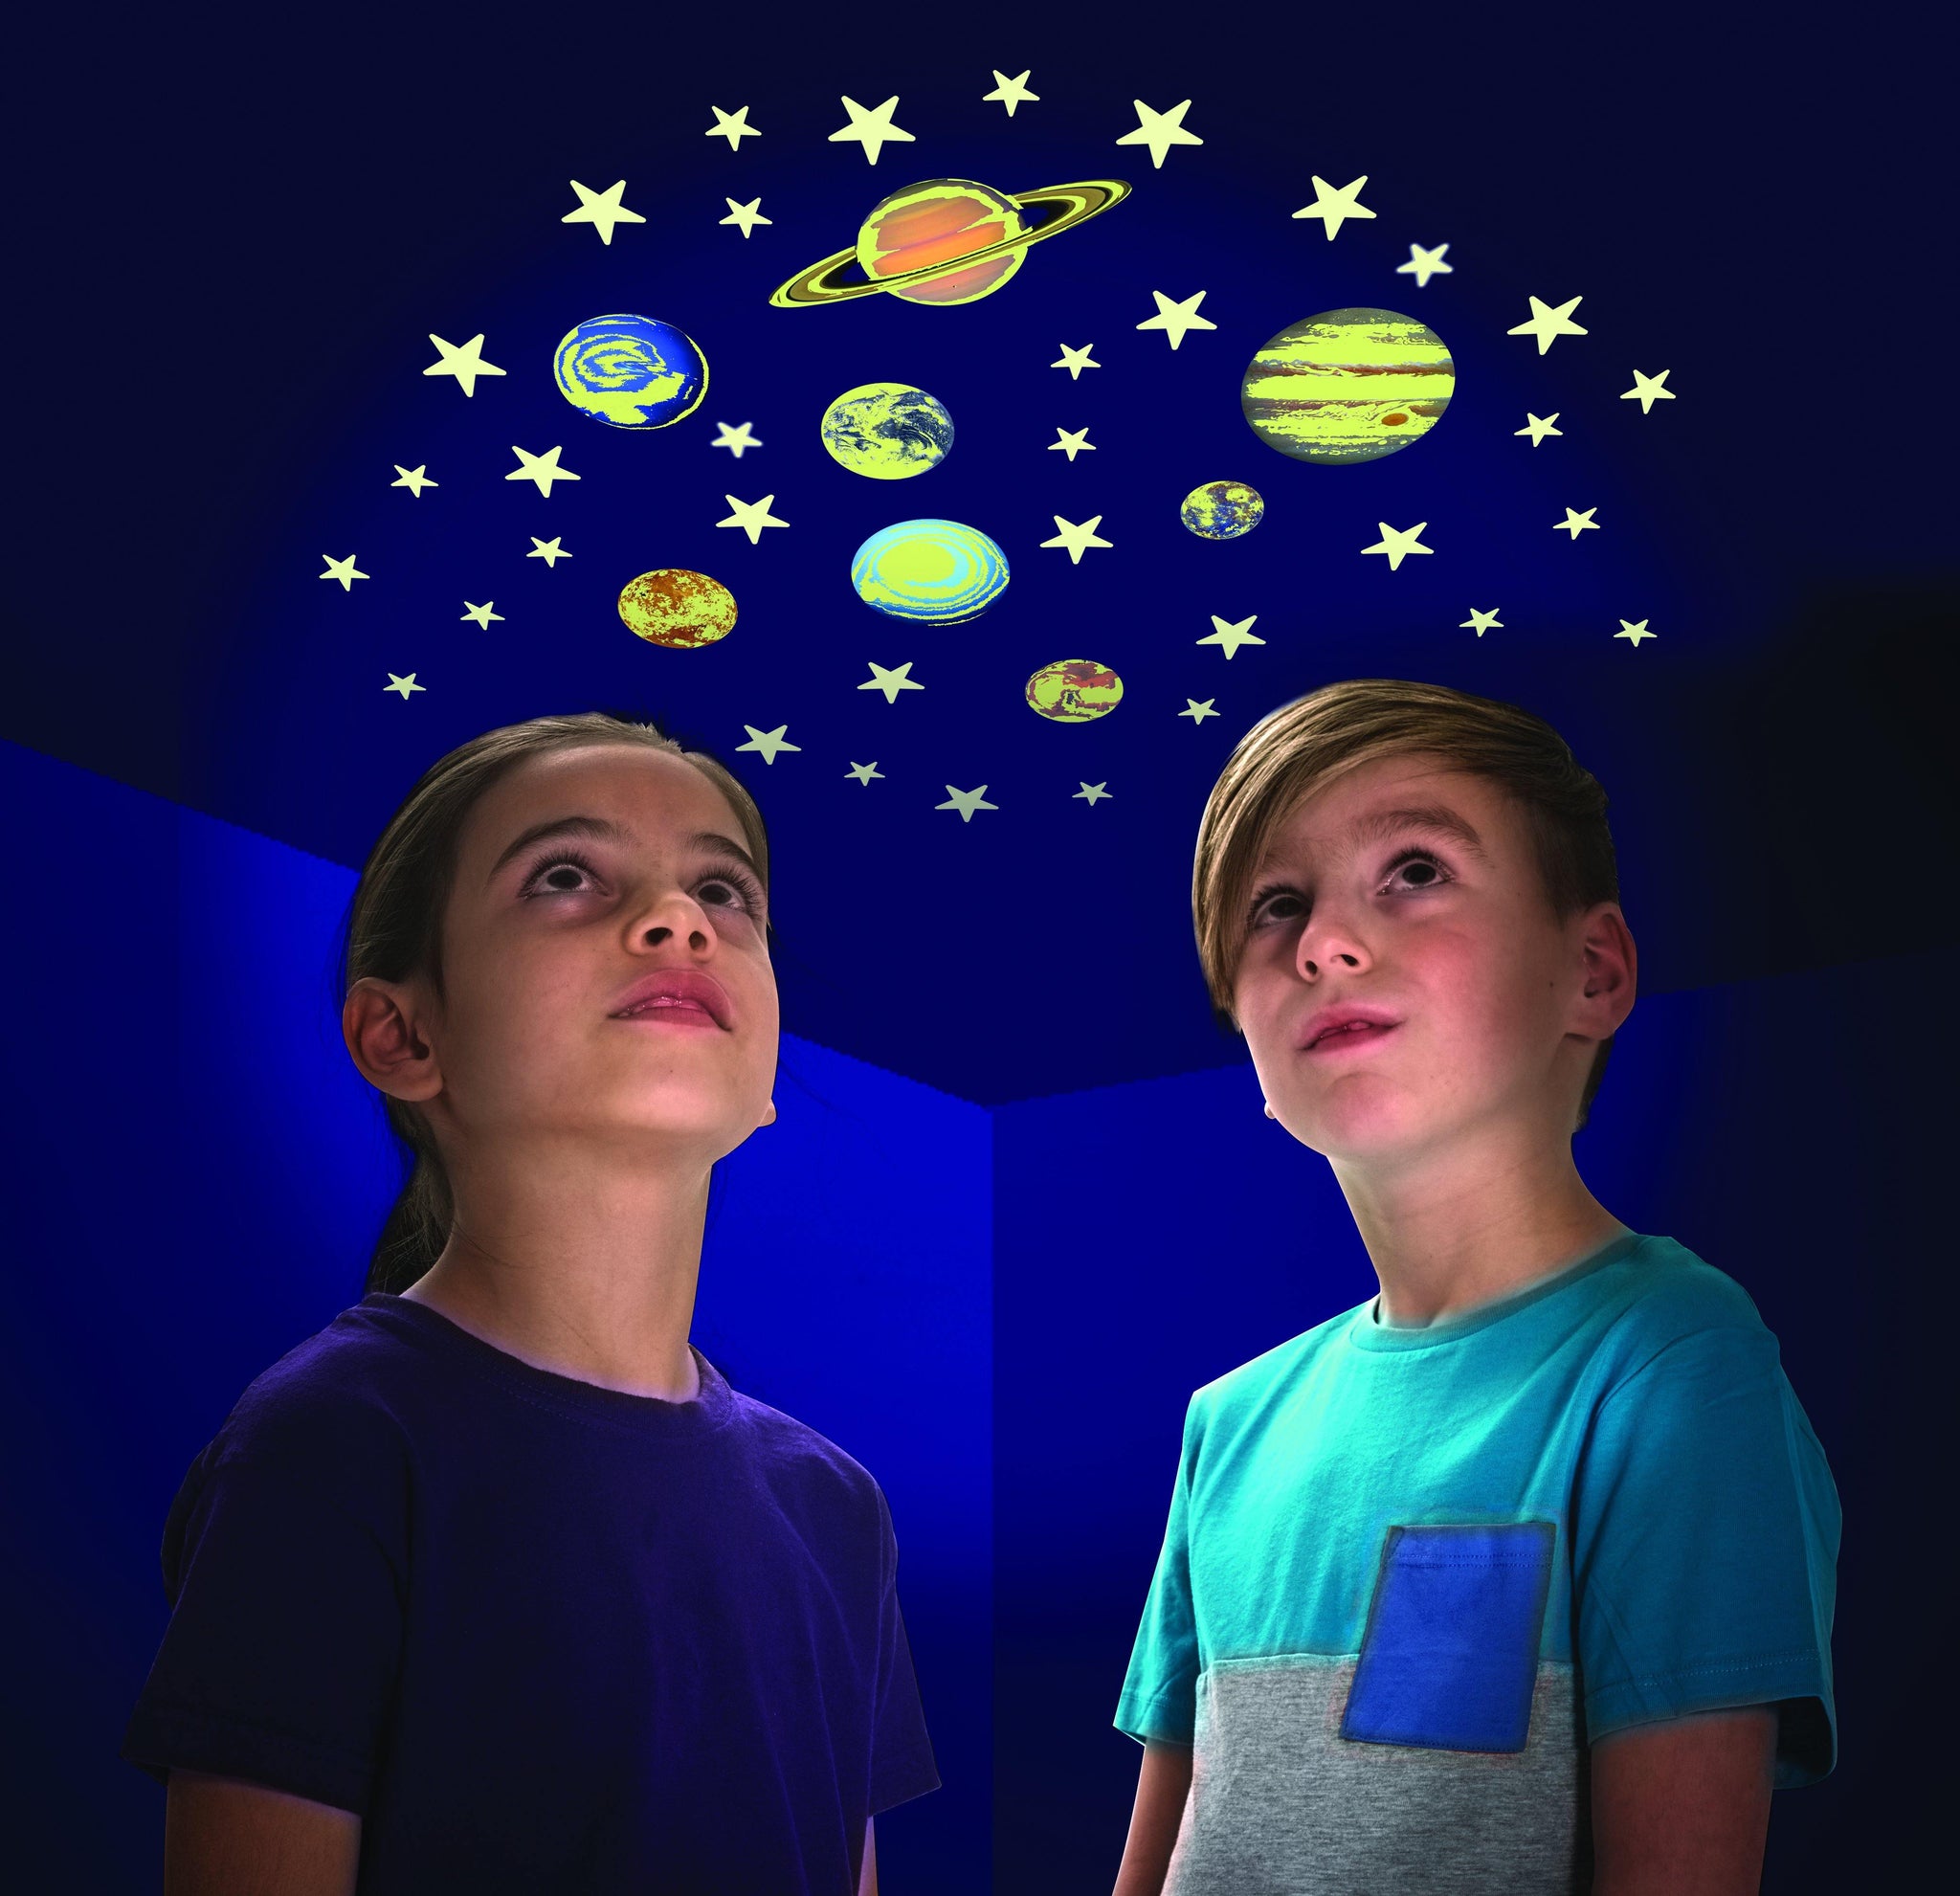 Glow in the Dark Stars & Planets - Home Accessories - Science Museum Shop 2